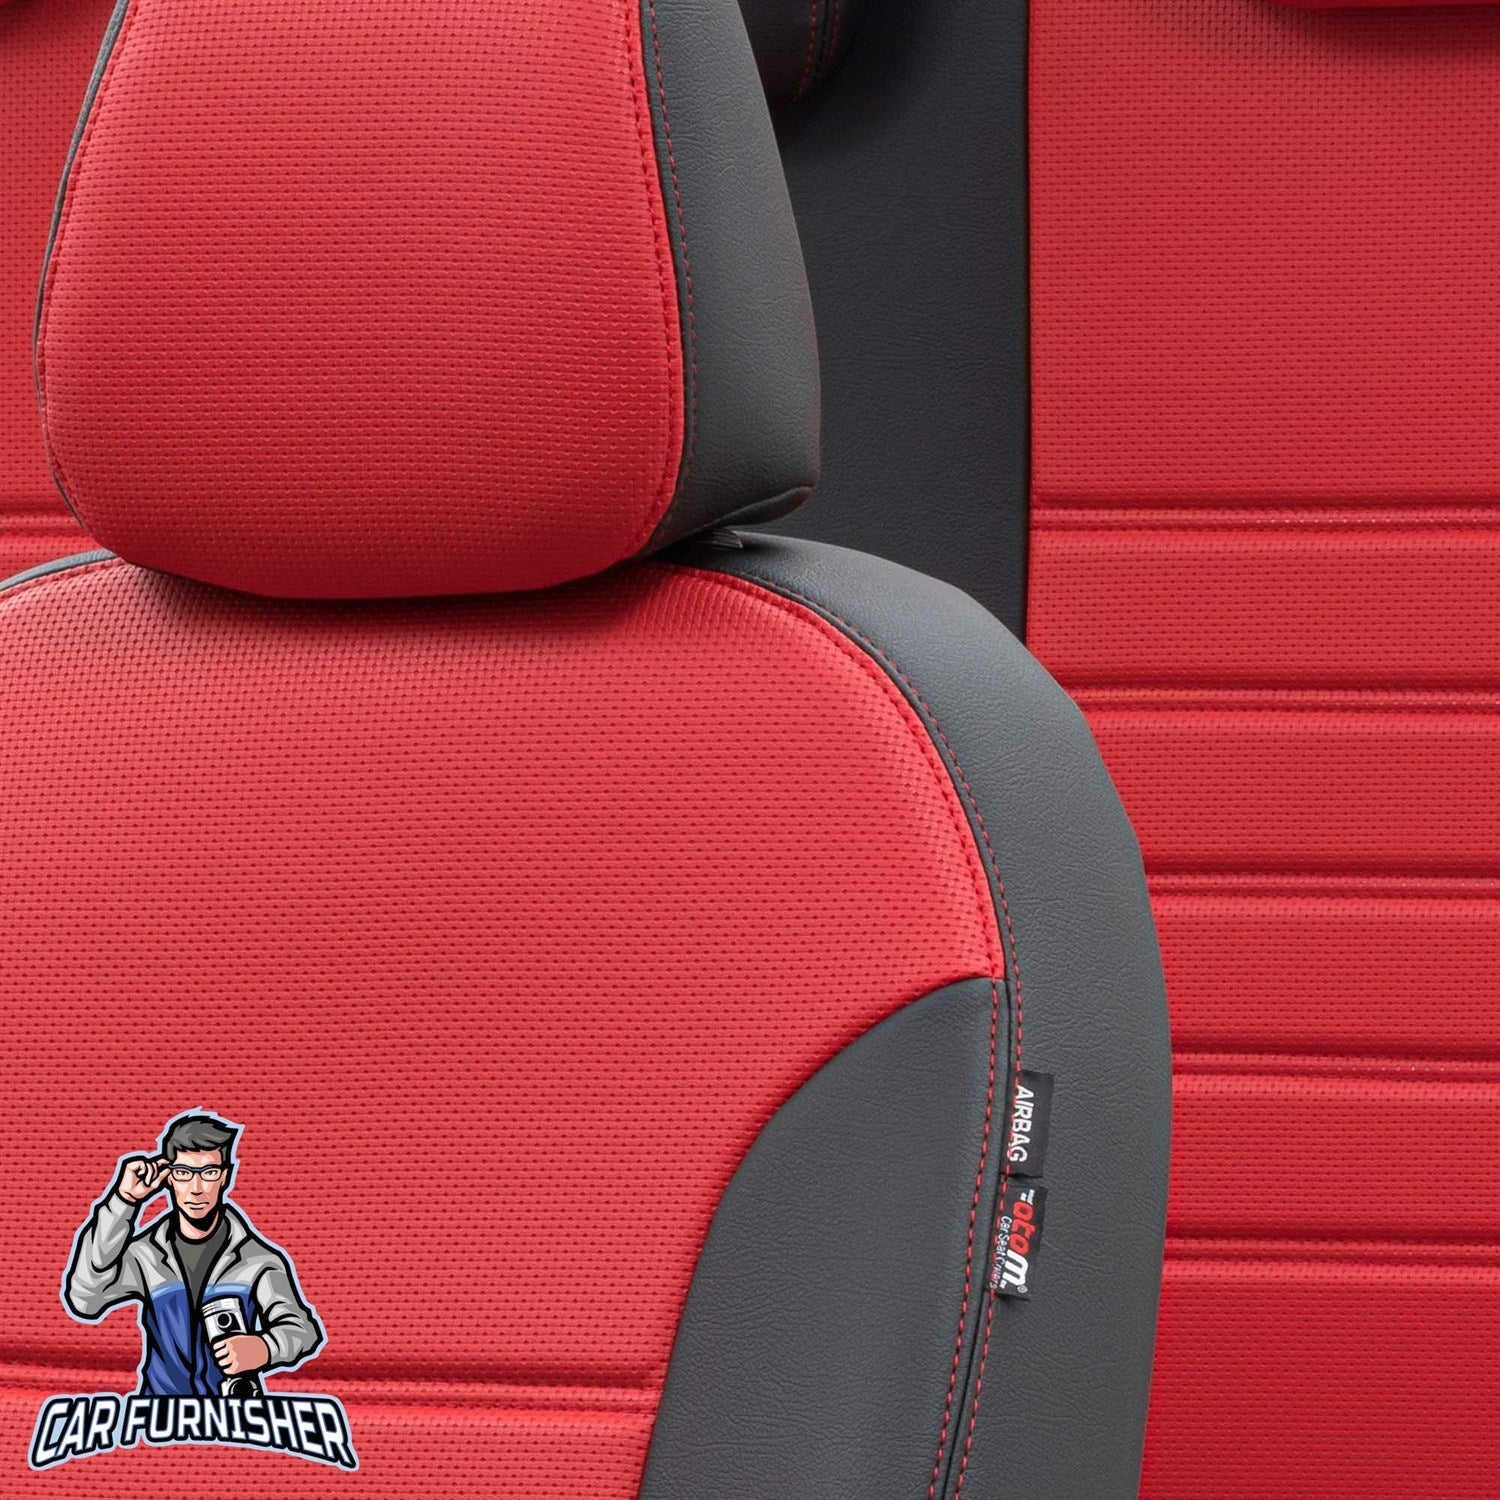 Man TGE Seat Covers New York Leather Design Red Leather